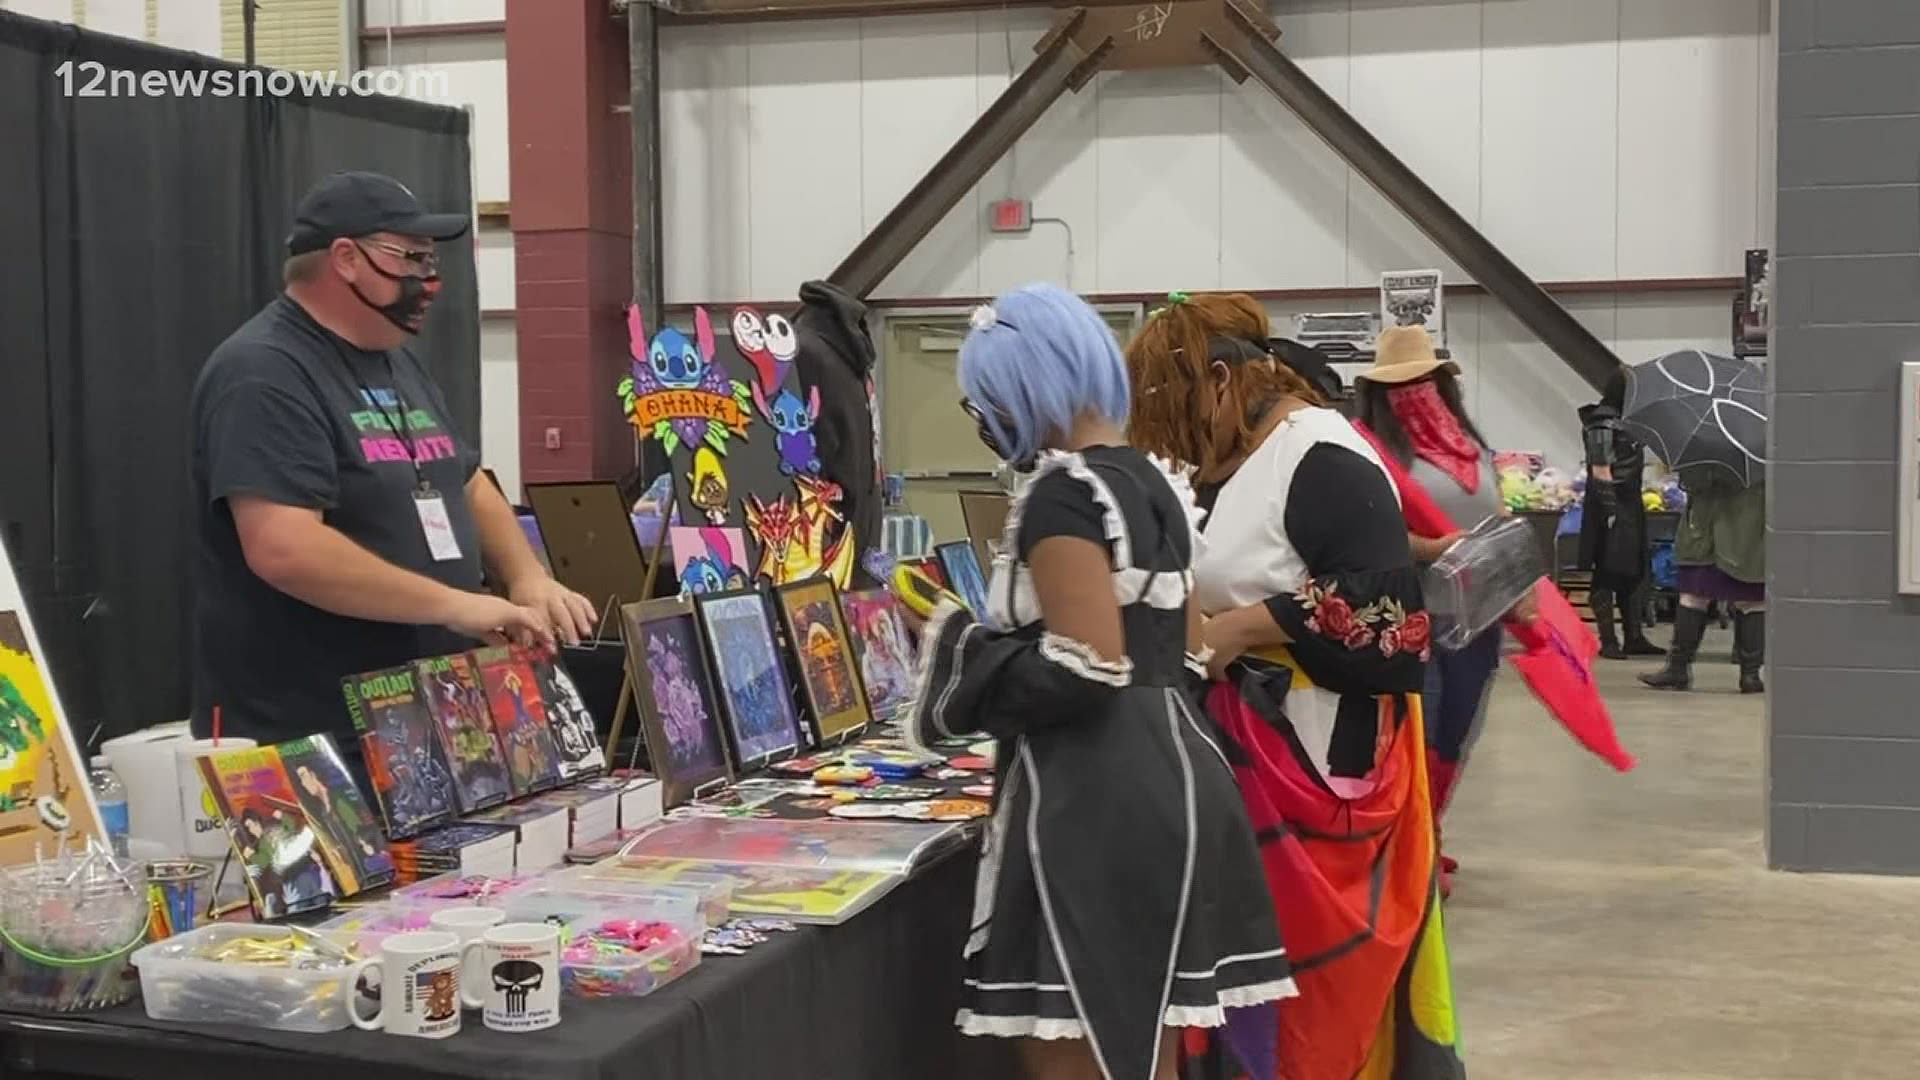 Beaumont ComicCon is back at Ford Park this weekend, the 2nd annual event. It's one of the few in-person events starting to happen in Southeast Texas.